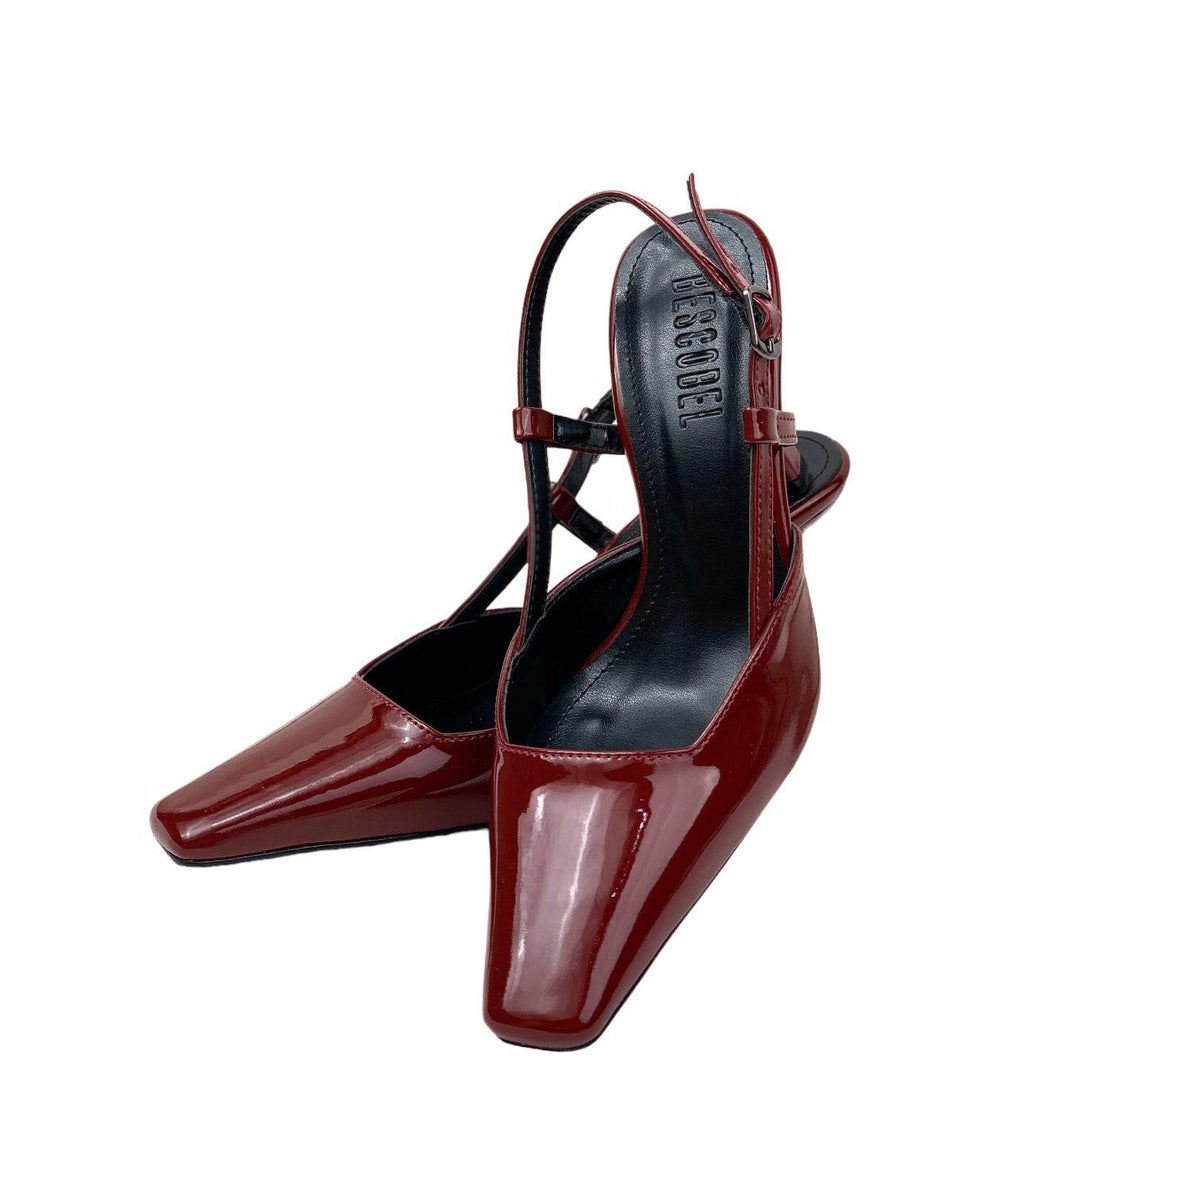 Women's Yojd Burgundy Patent Leather Heeled Open Back Shoes 8 CM - STREETMODE ™